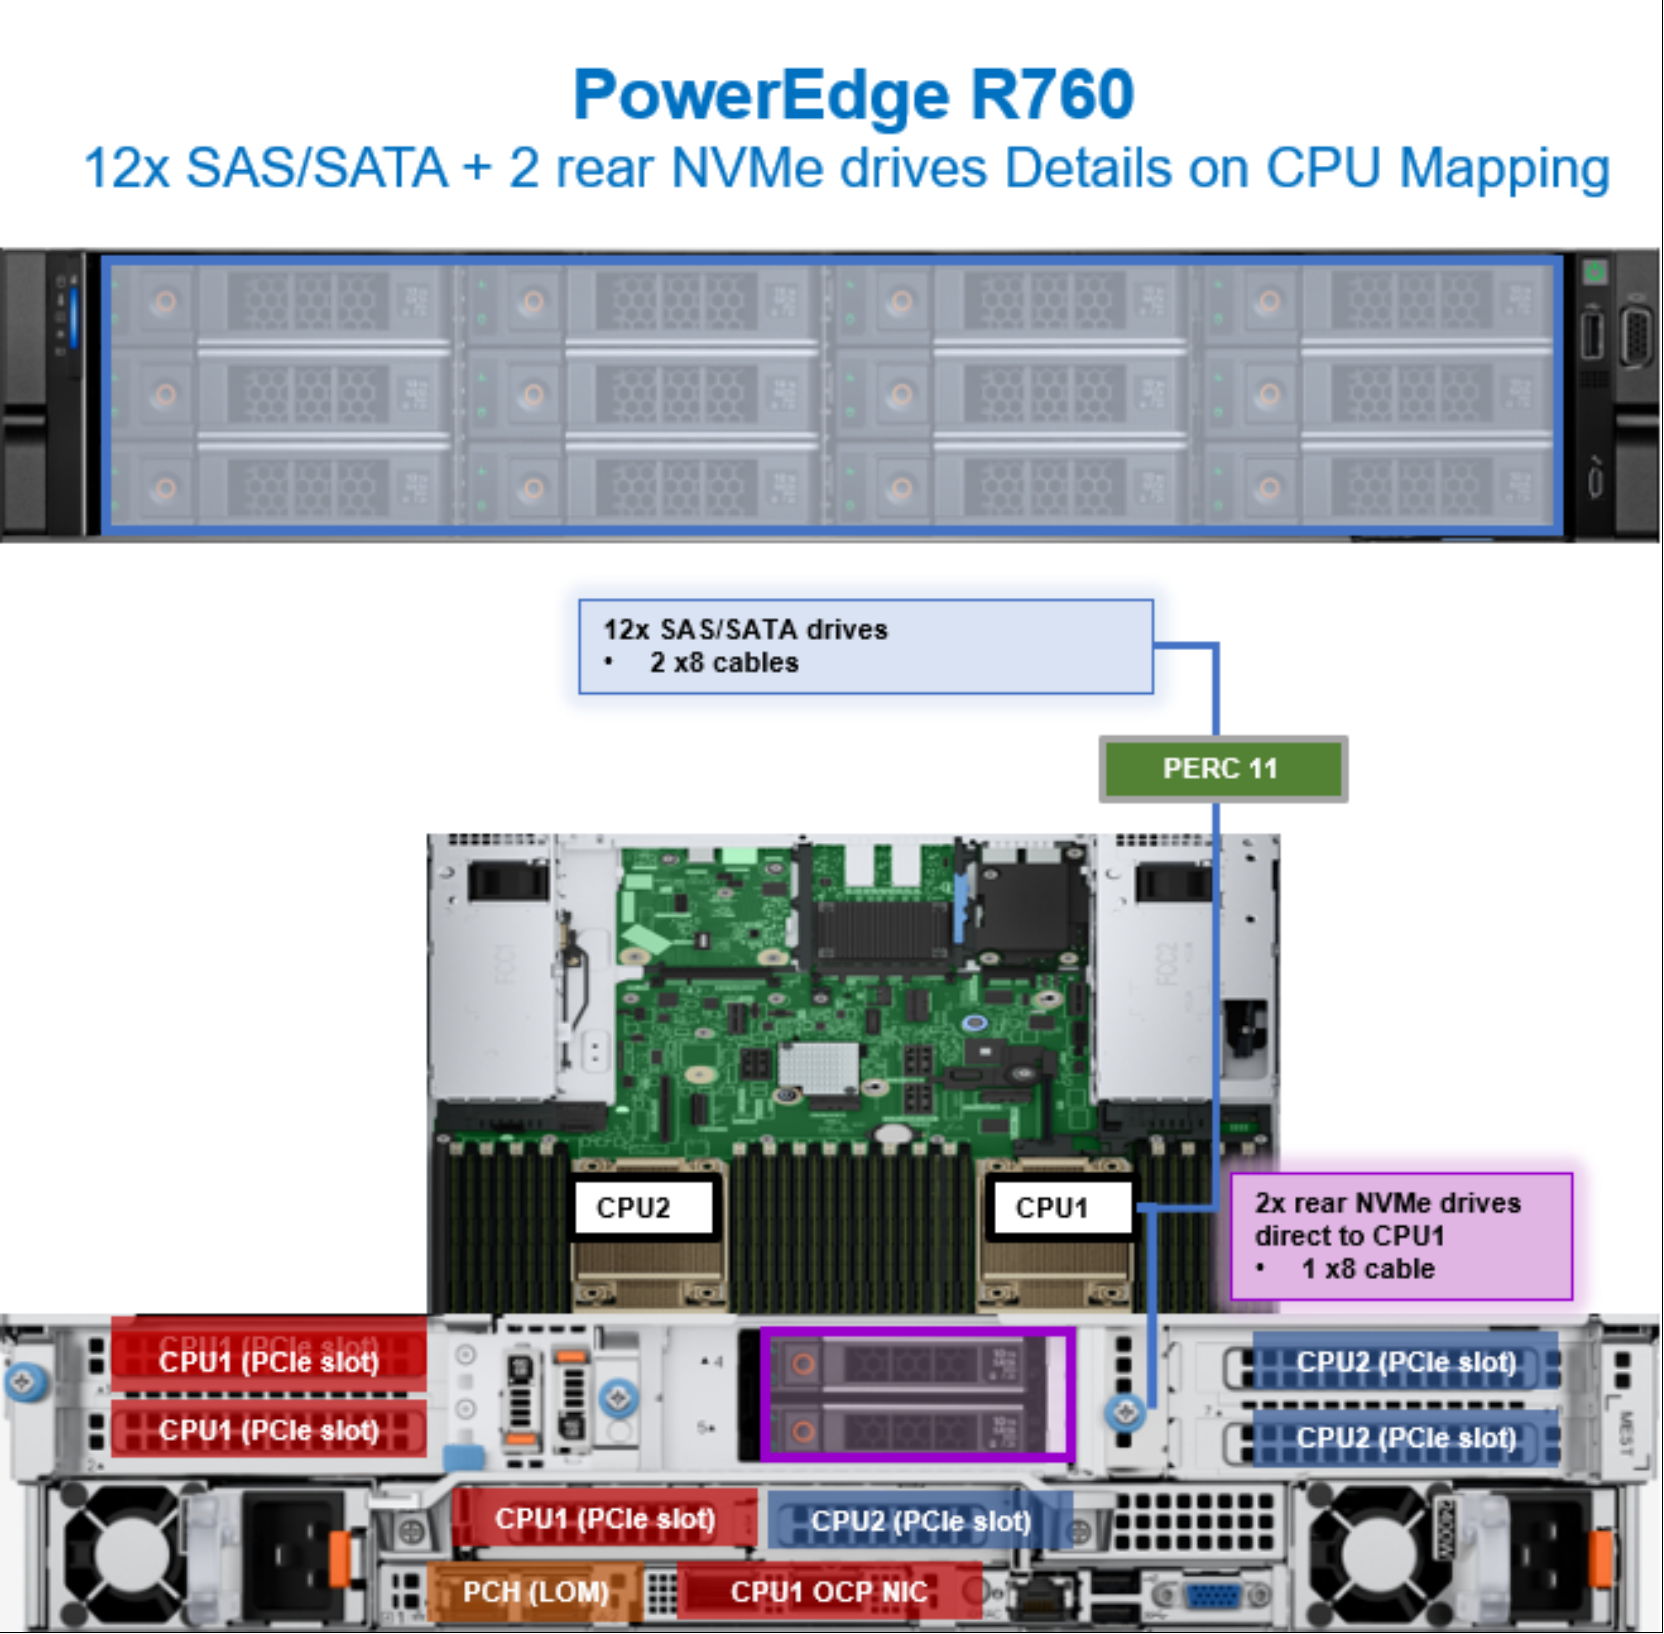 Poweredge R760 Populated With 12 Sassata Drives And Two Rear Nvme Drives Nvme And Io 5325